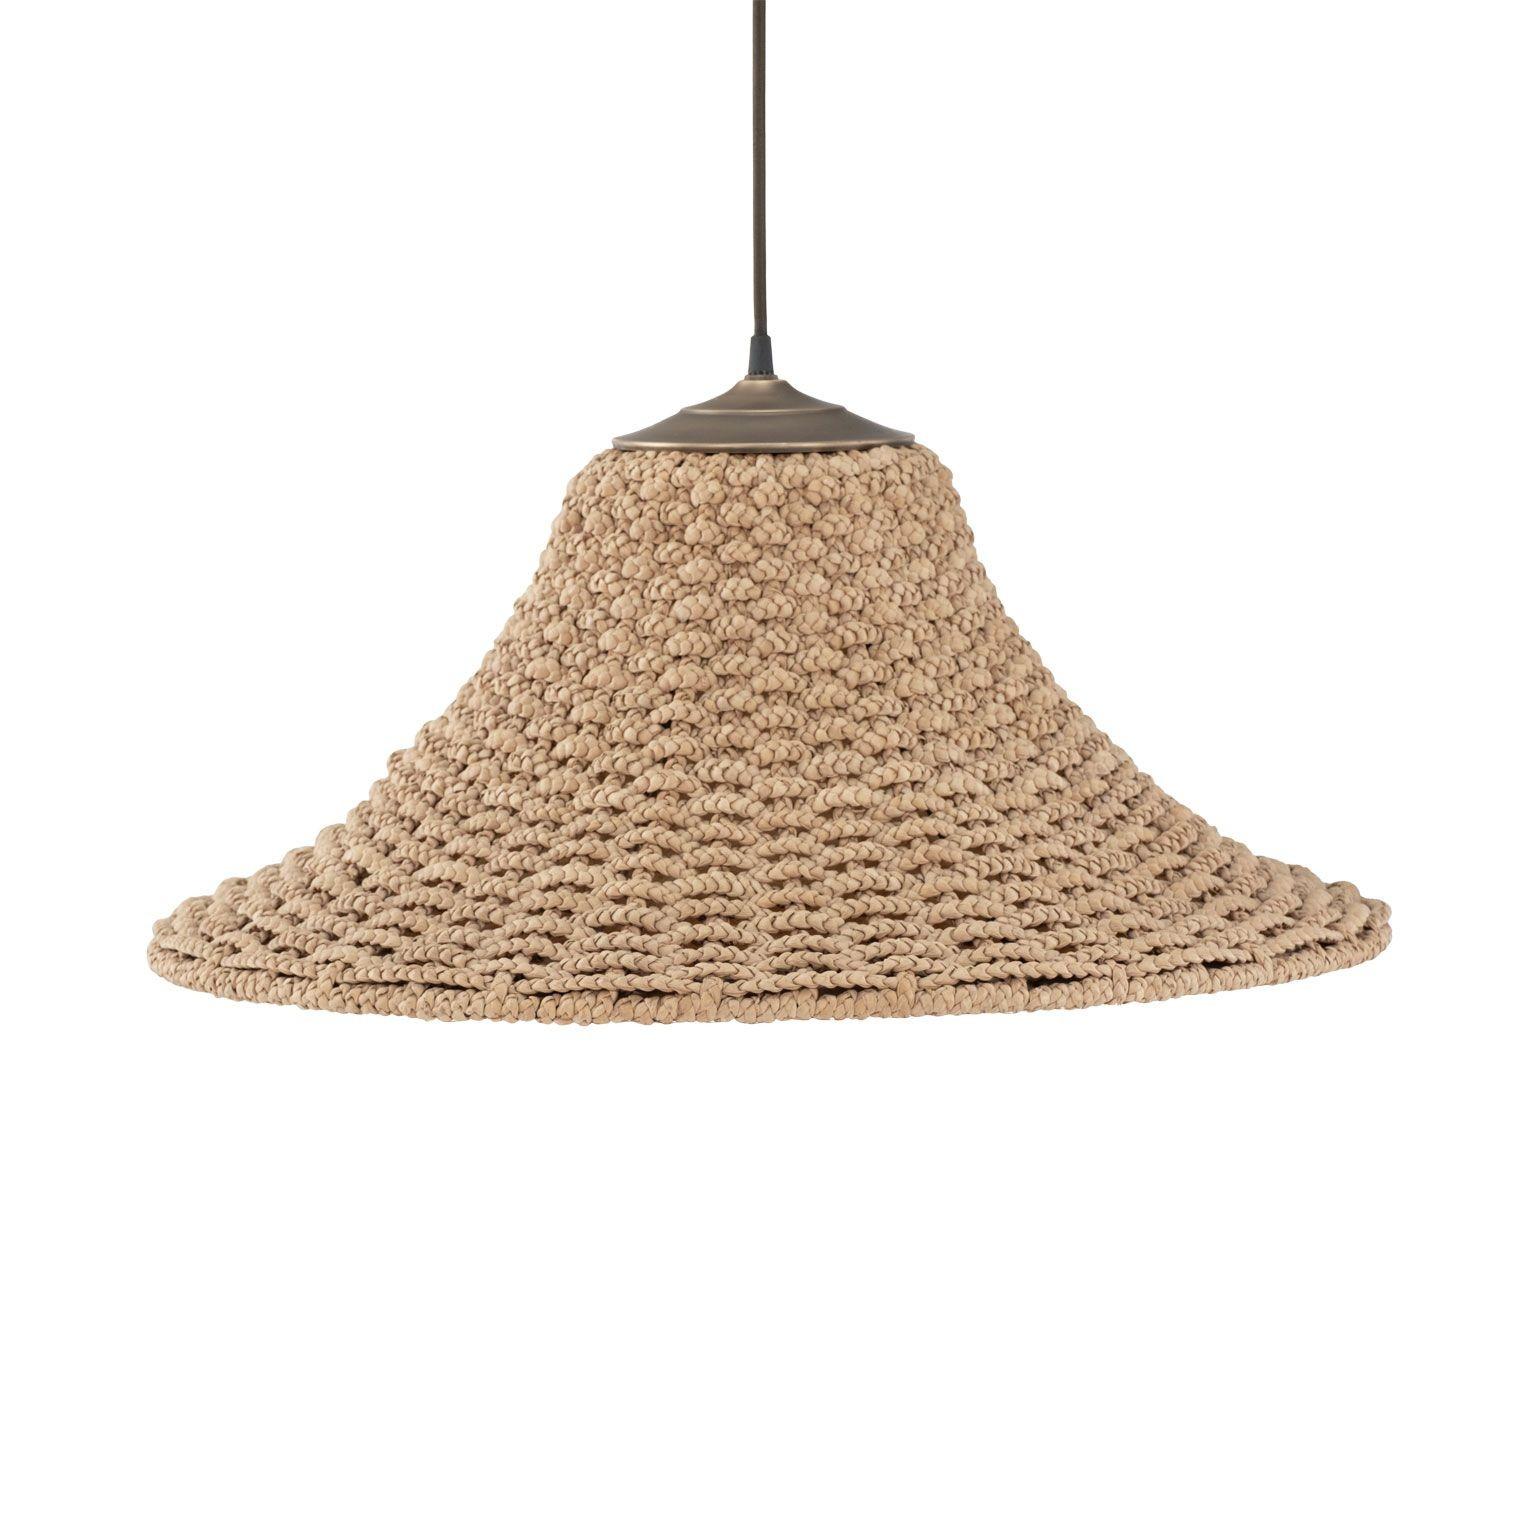 Large woven sisal pendant light: silk lined and newly wired for use within the USA using UL listed parts. Suspended by thick round rayon-covered cord. Includes simple antique brass finished canopy. Ready to install.